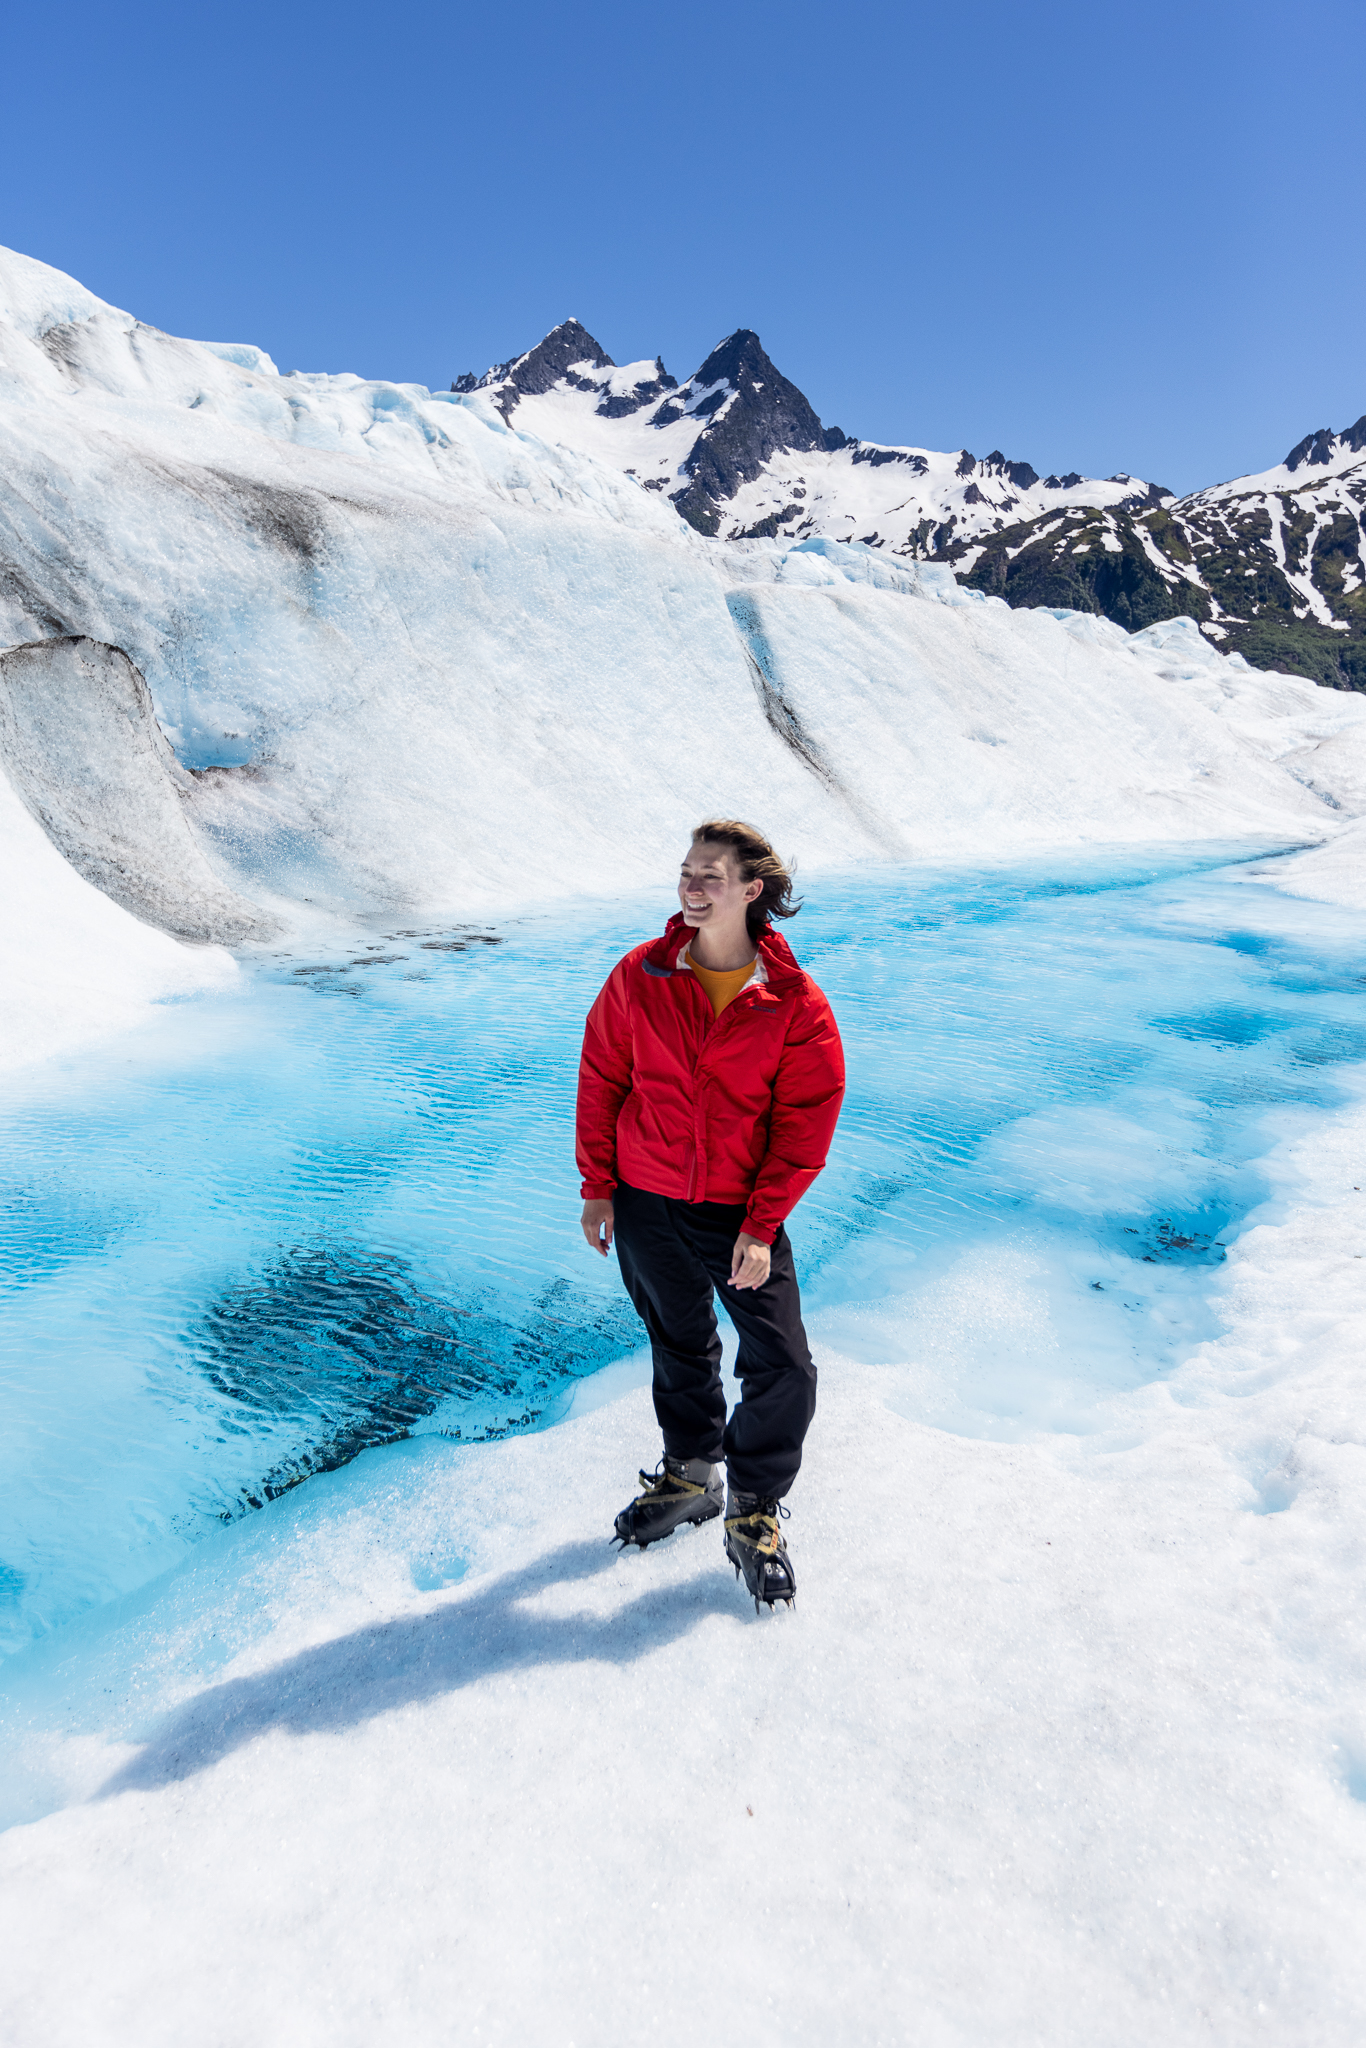 Lindsay, One Girl Wandering, in a red jacket stands in front of a bright blue pond on Mendenhall Glacier